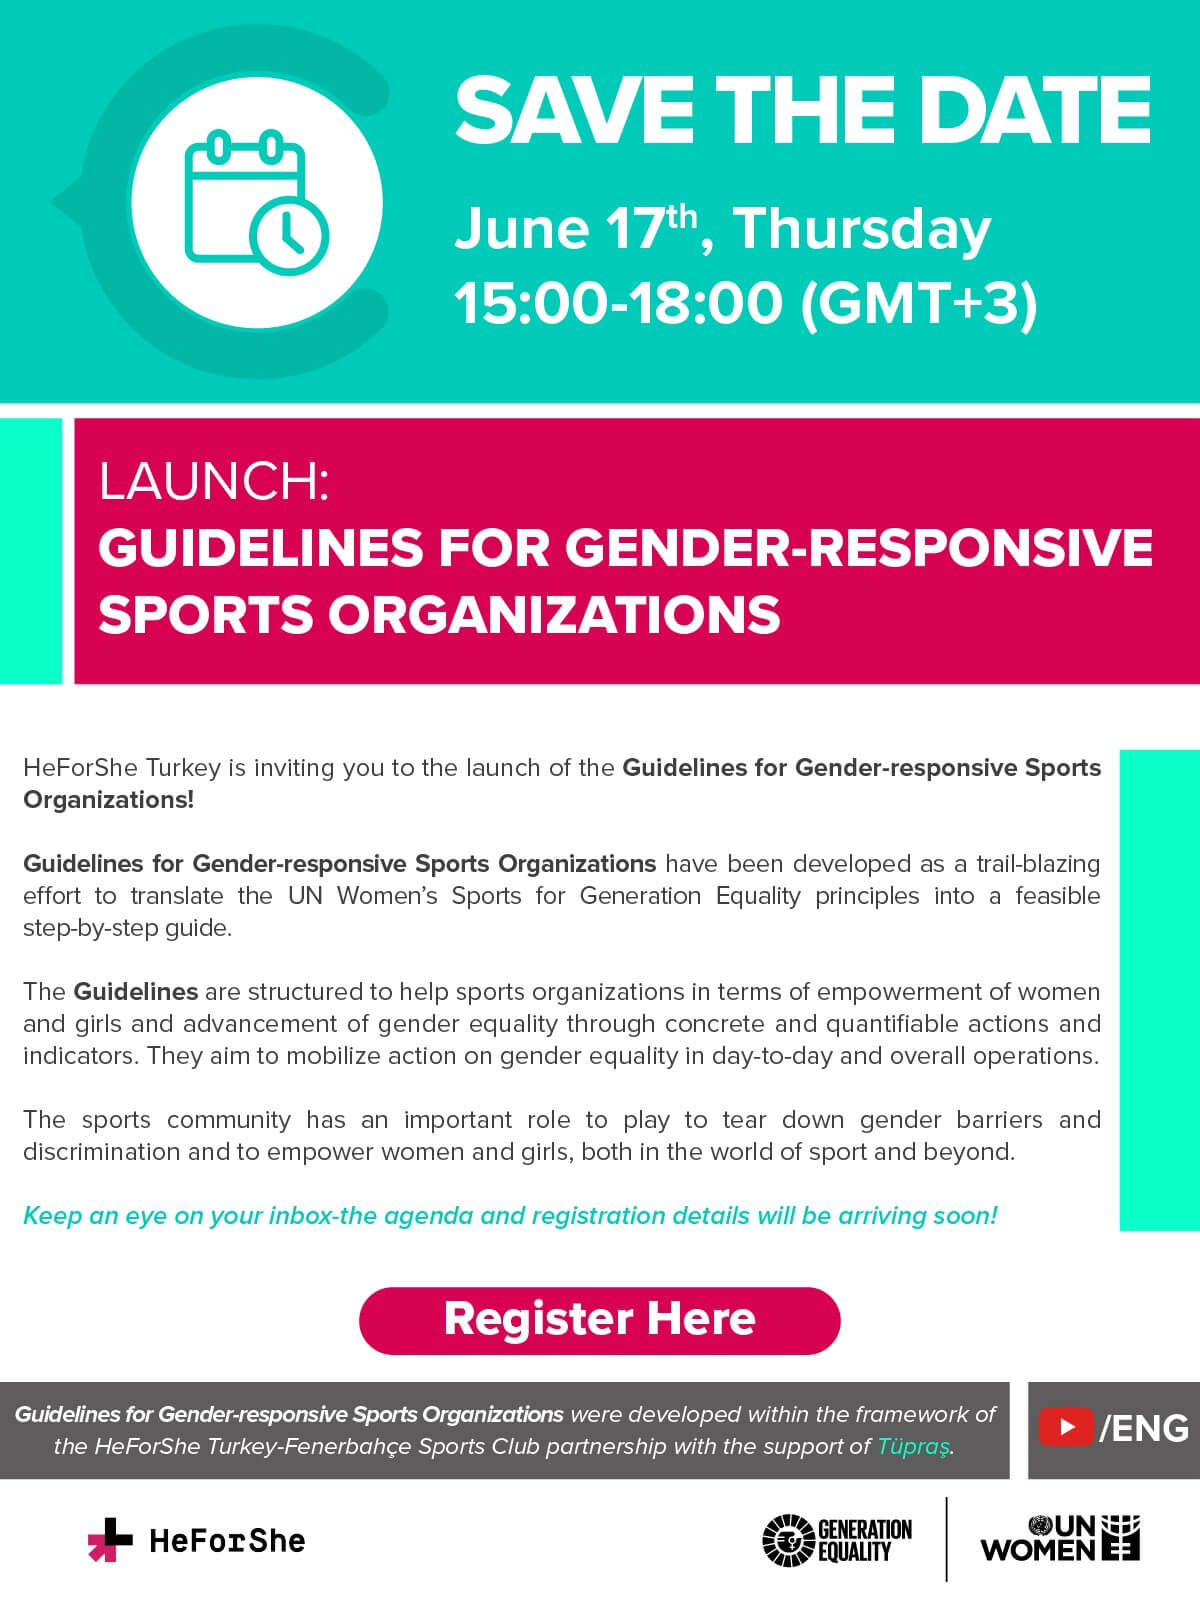 Launch of the guidelines for gender-responsive sports organizations